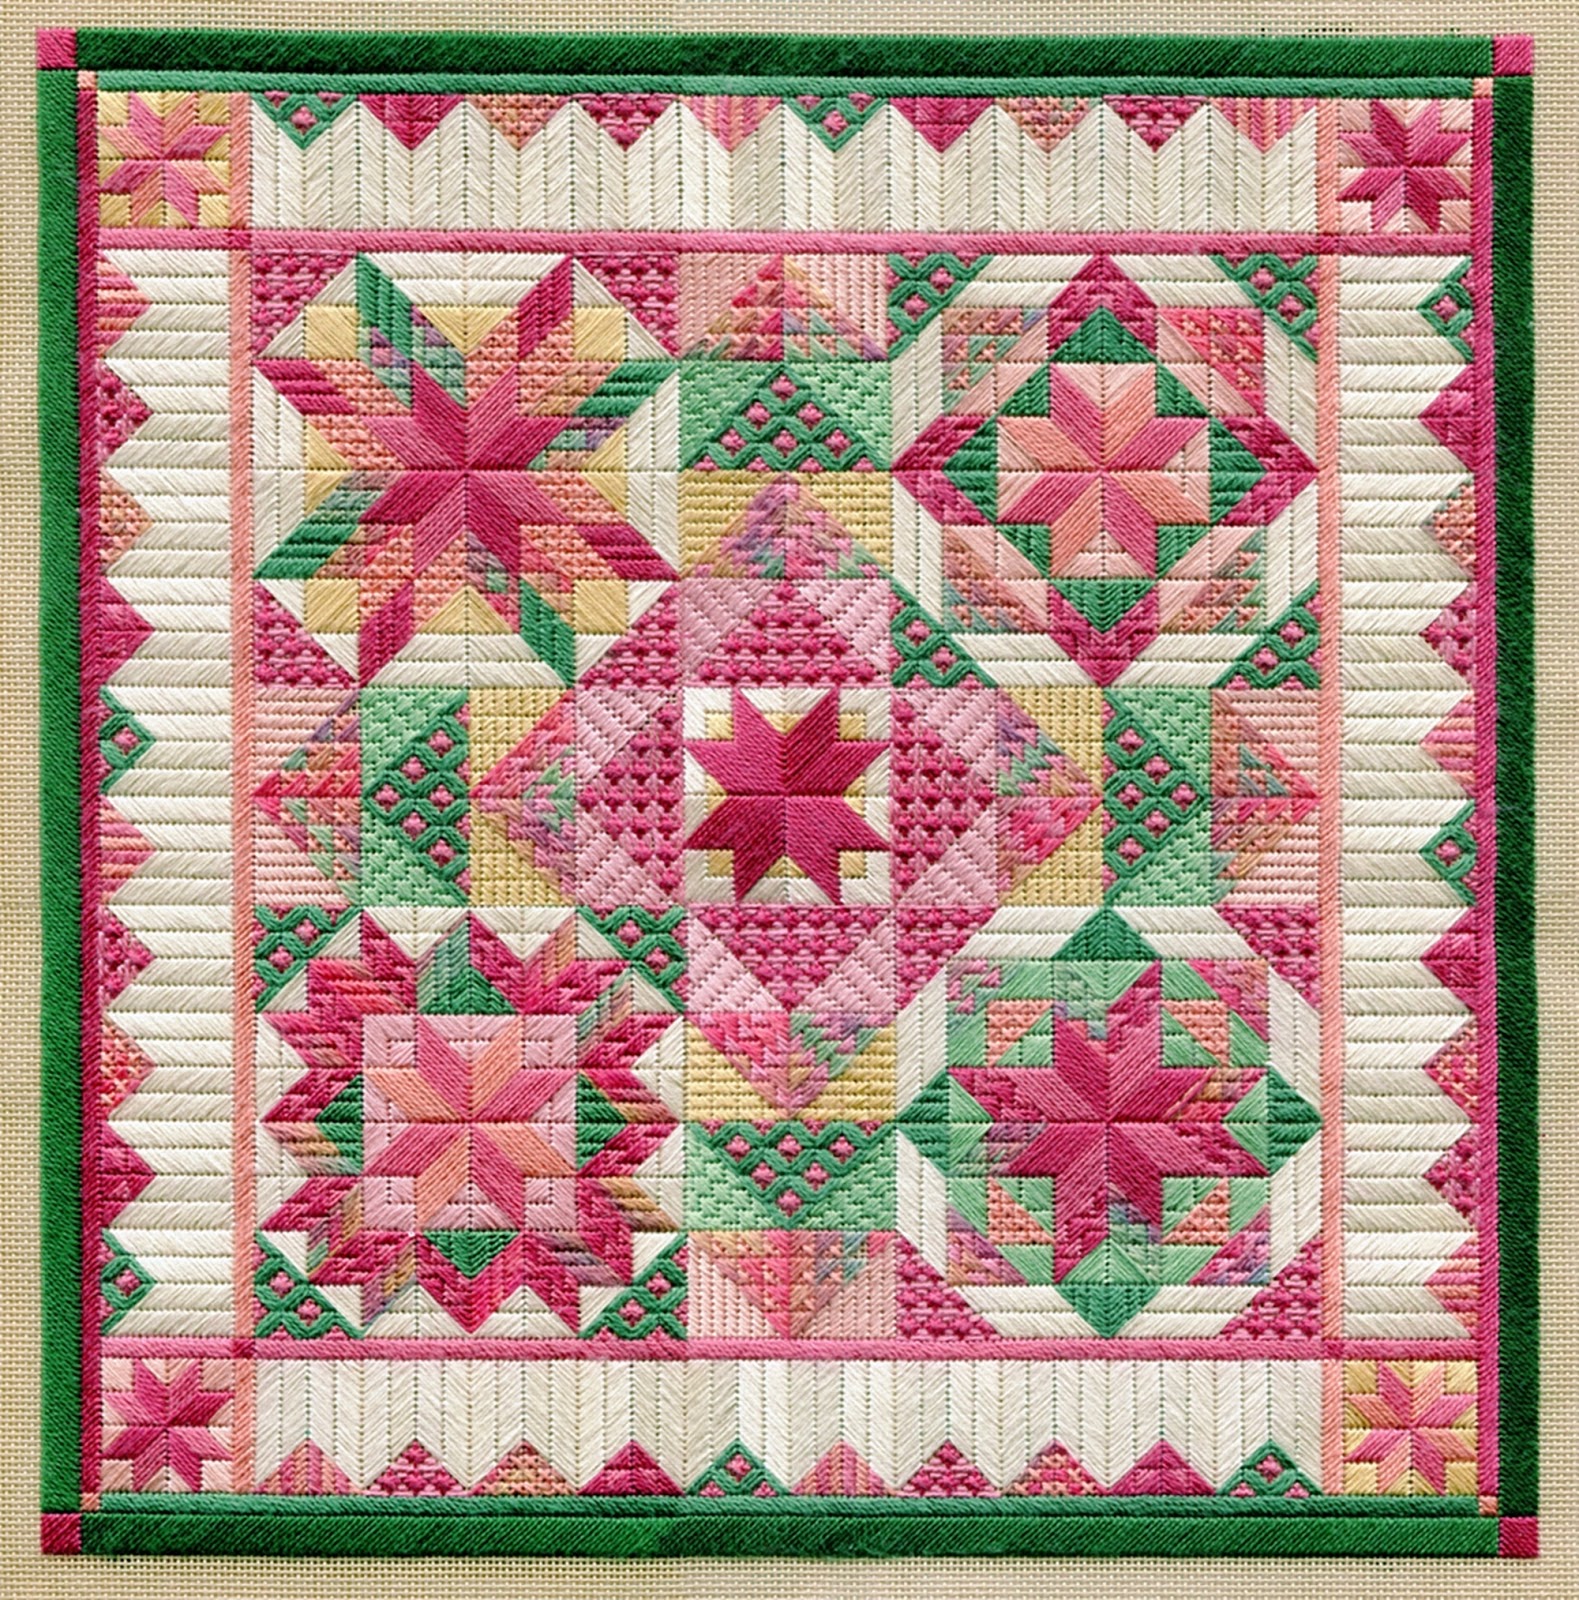 TwoHanded Stitcher Colorful New Quilt Design!